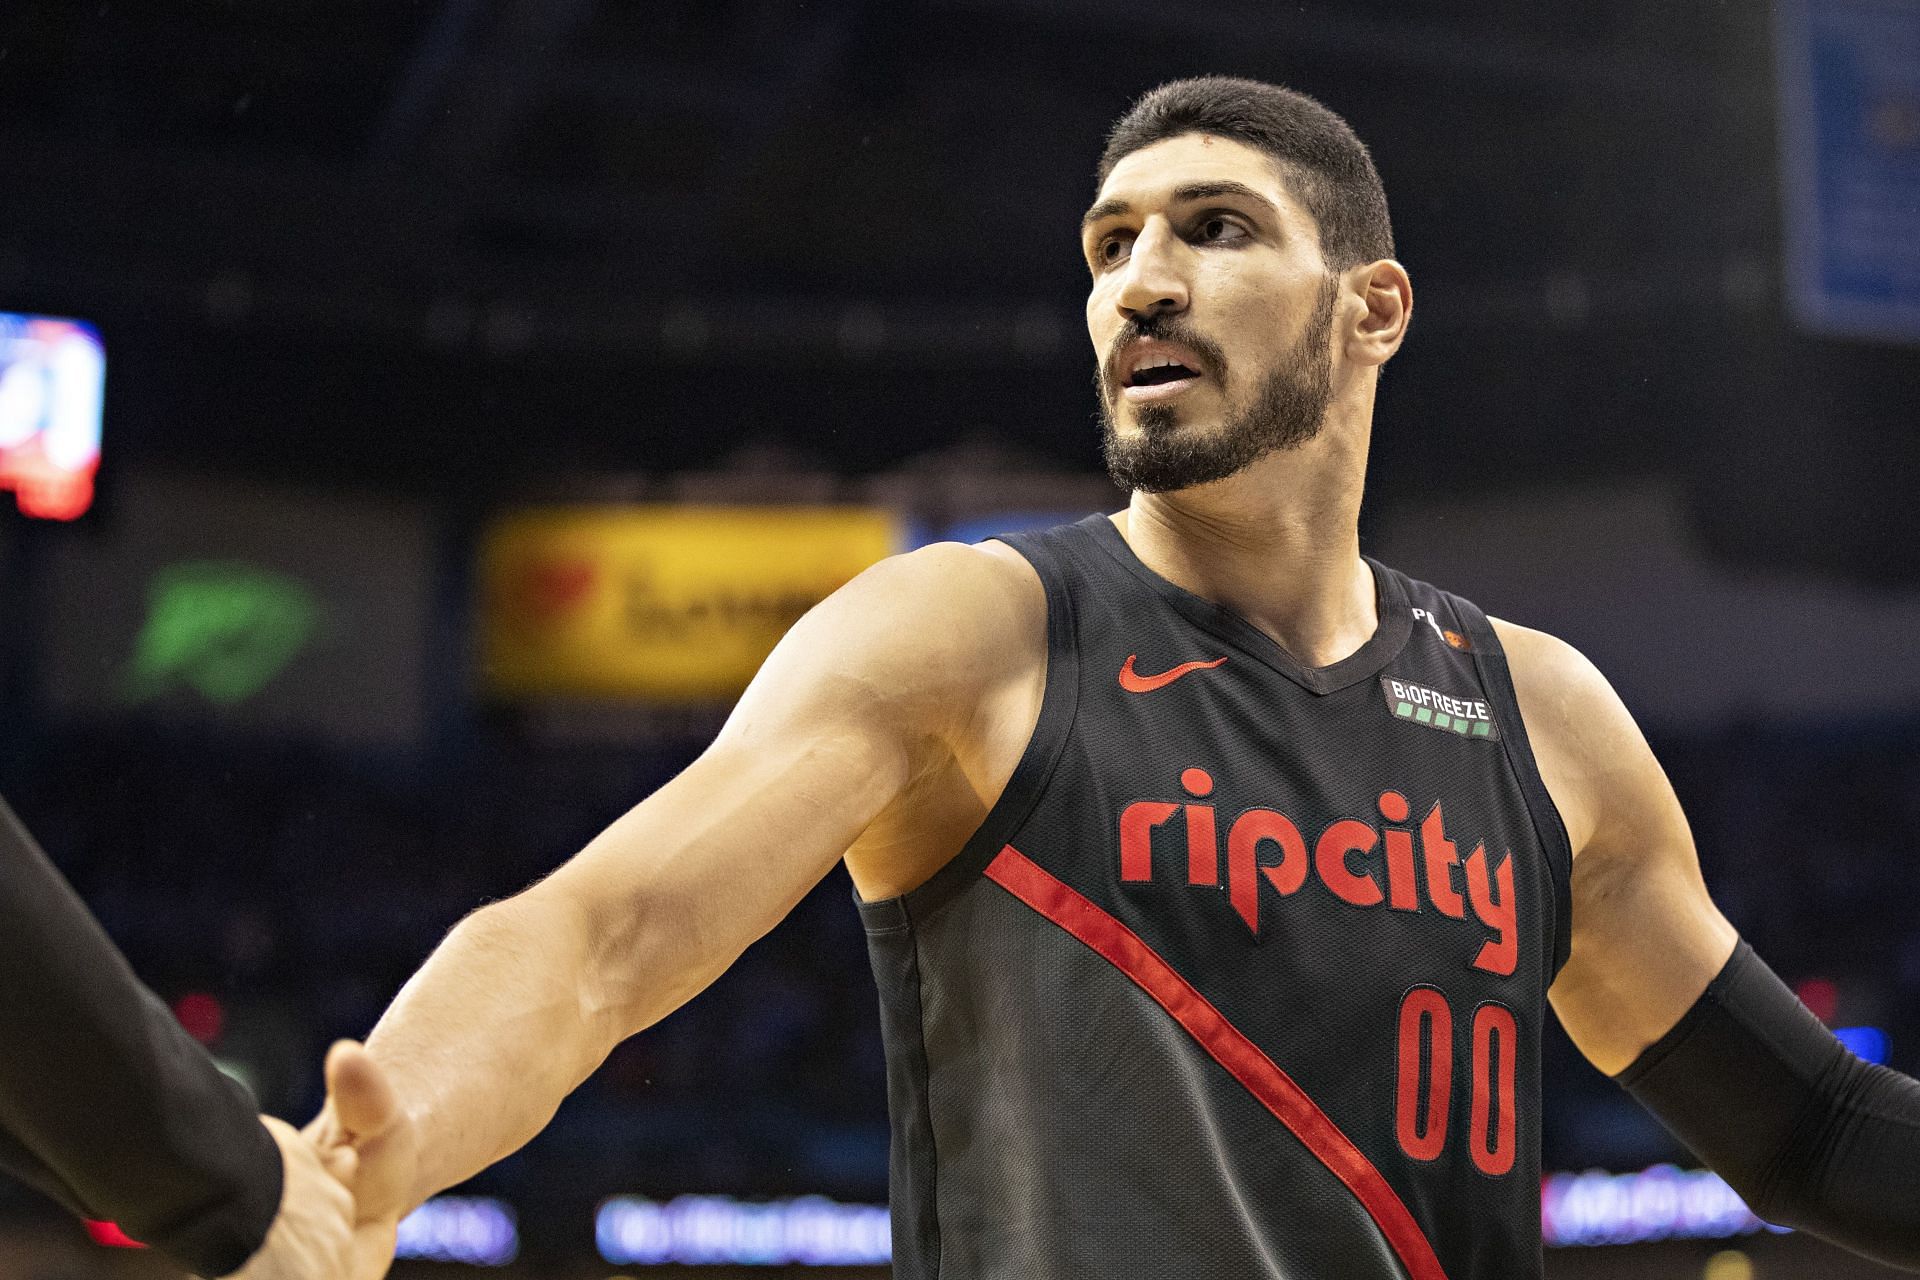 Enes Kanter Freedom of the Portland Trail Blazers during the 2019 NBA playoffs